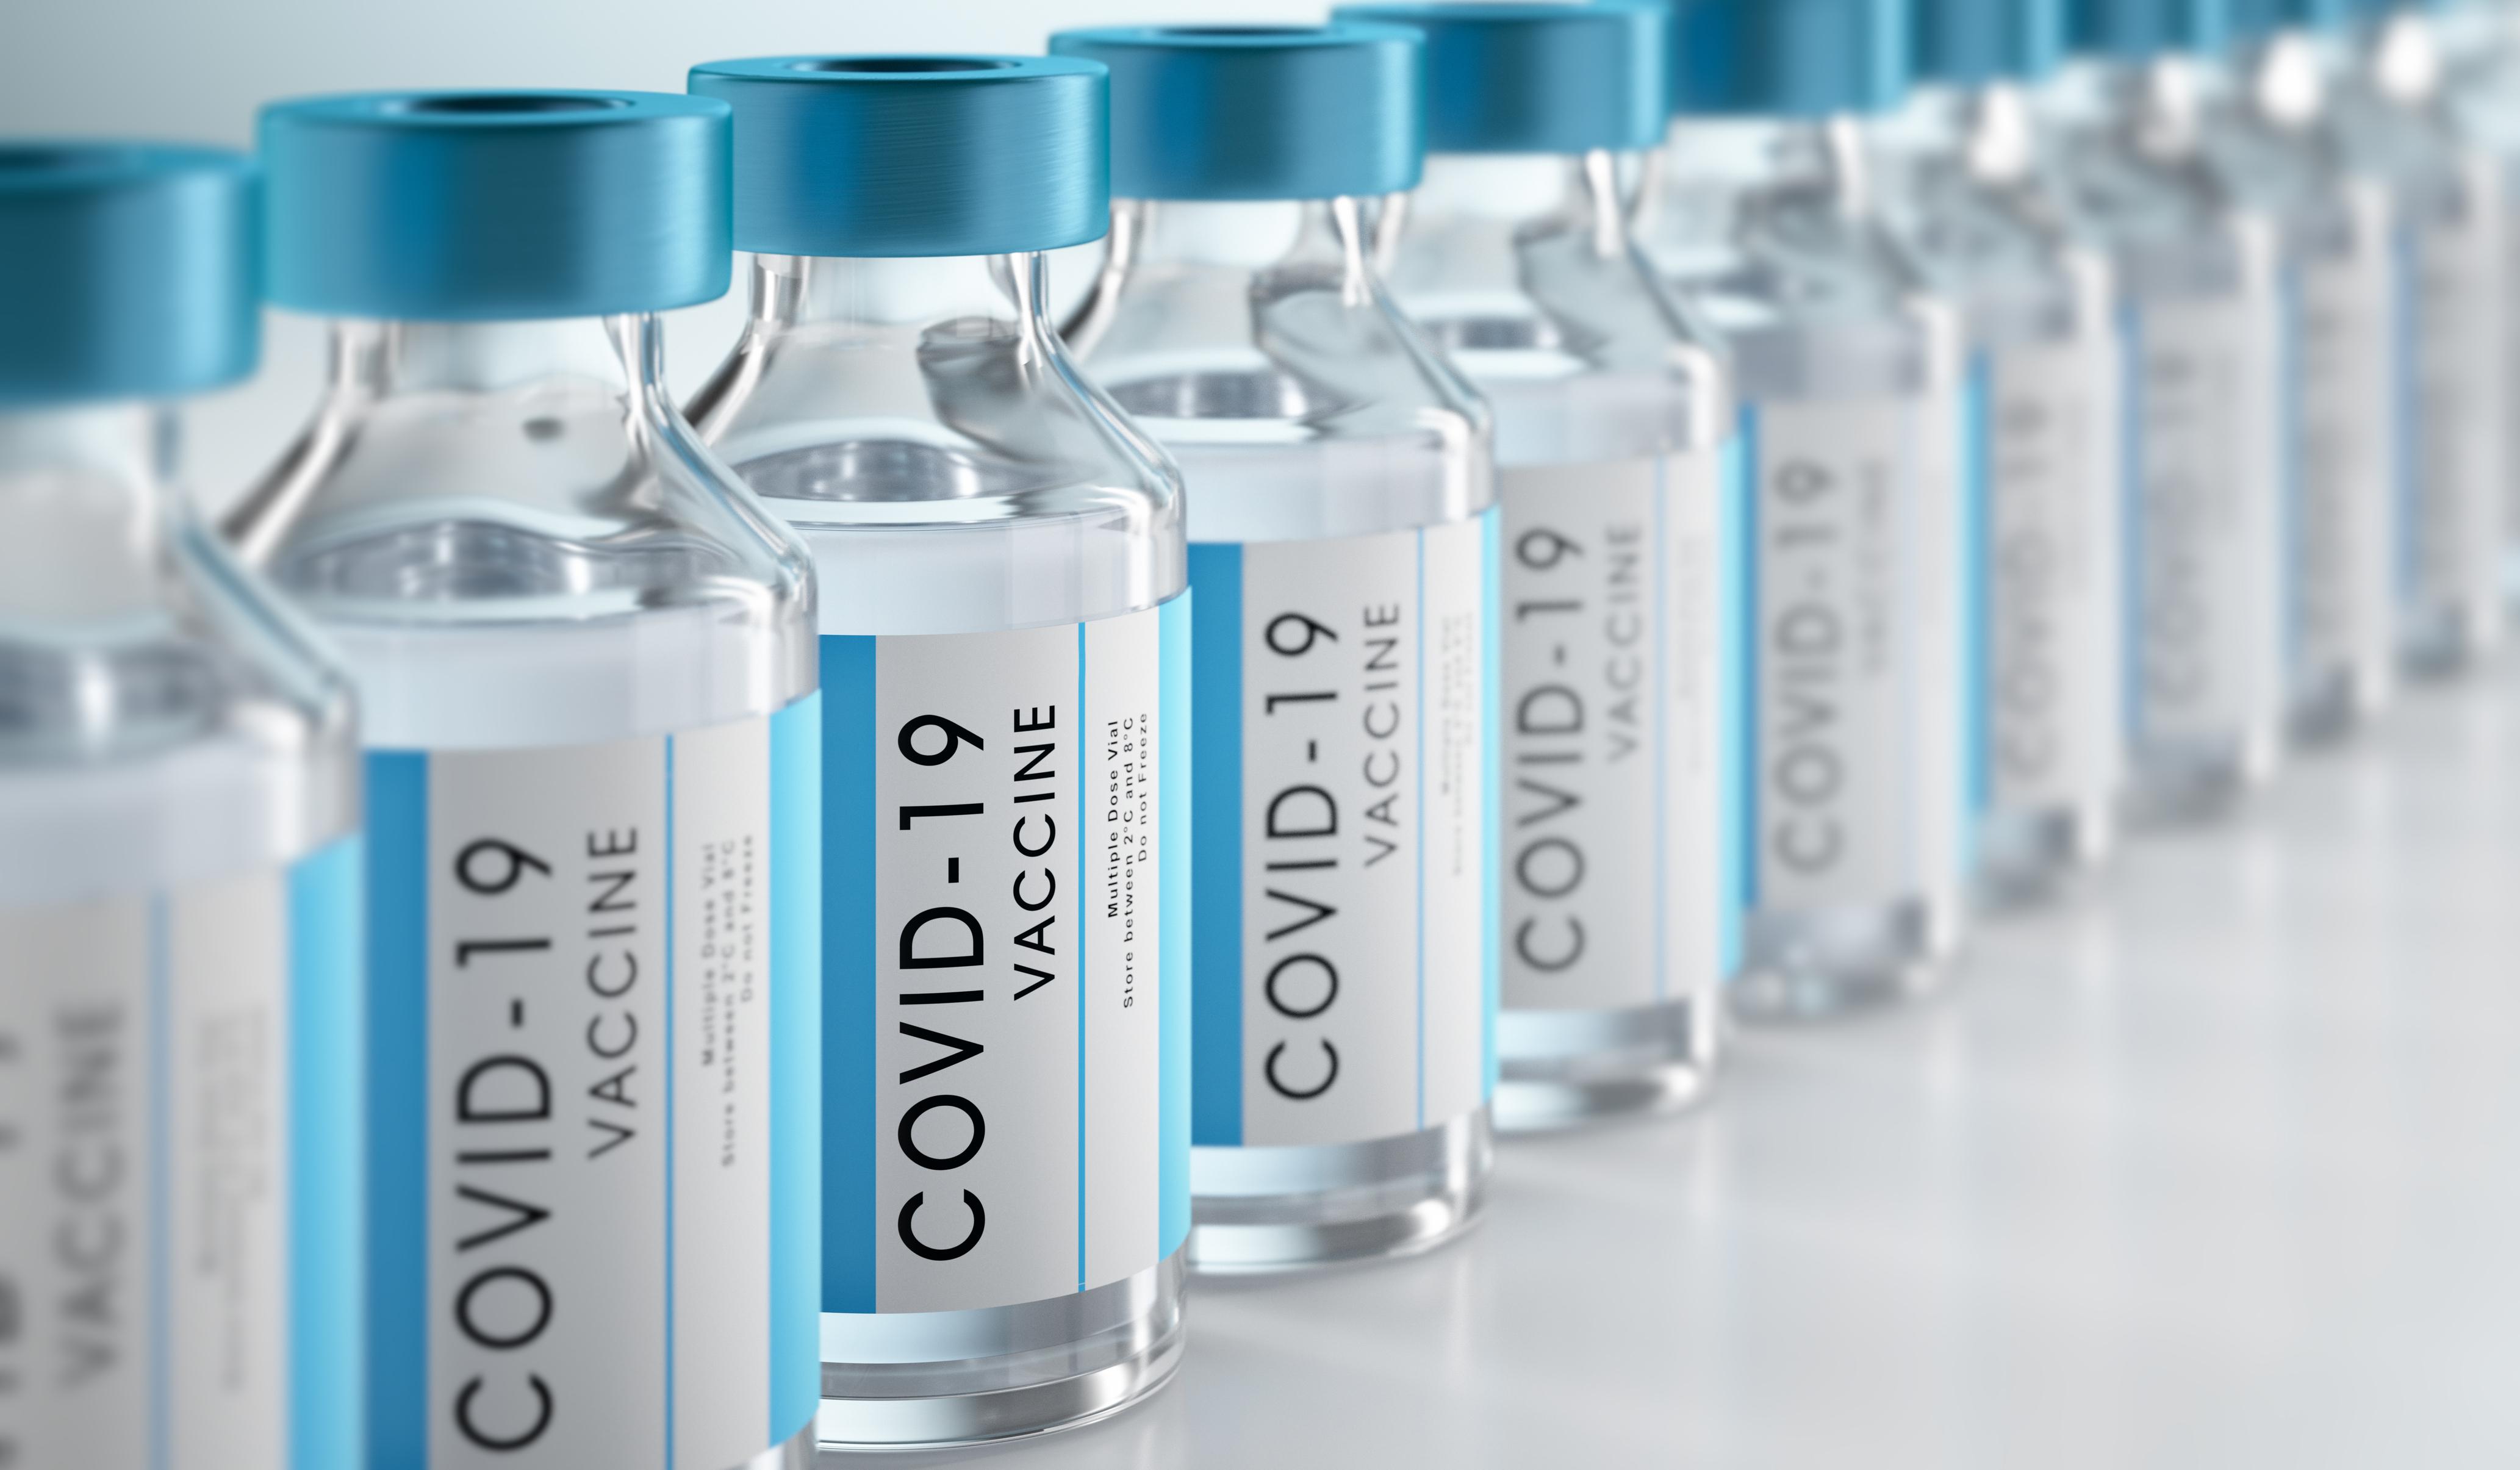 Cancer Patients & Other Immunocompromised Individuals Urged to Seek Third Dose of mRNA COVID-19 Vaccine